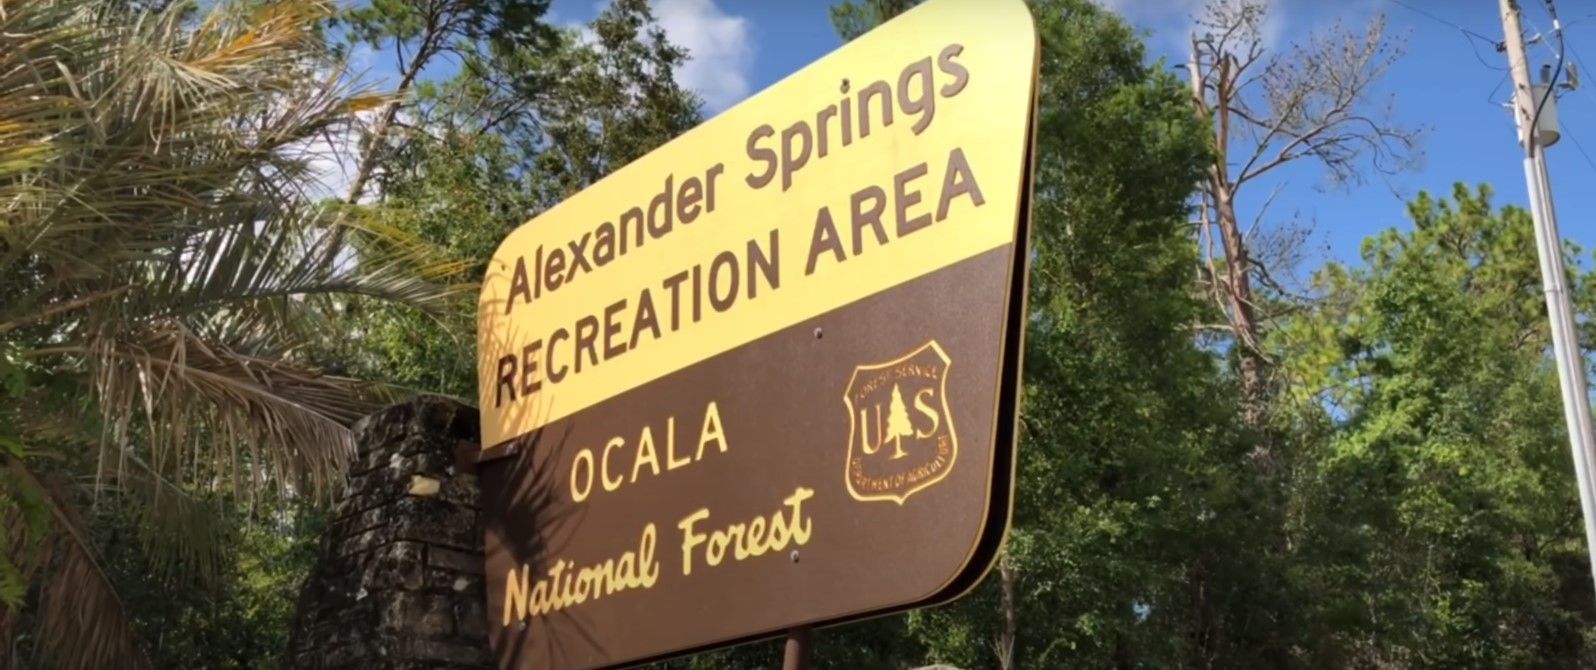 natural springs near orlando others in florida